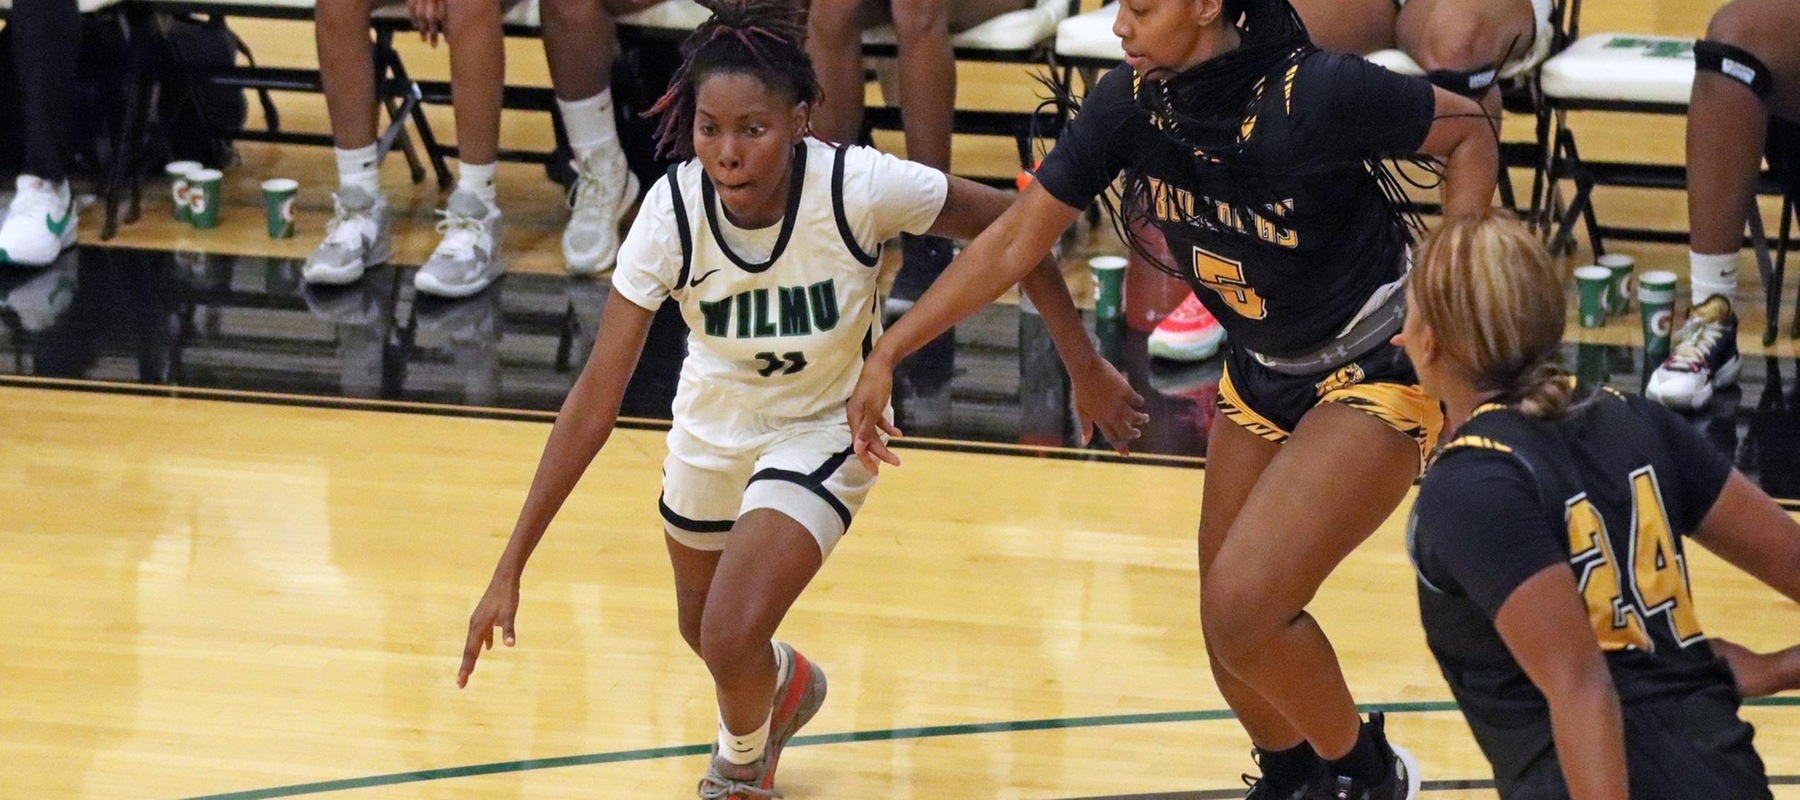 File photo of Cha'Nyah Dunston-Mason who scored 17 points against Shepherd. Copyright 2023; Wilmington University. All rights reserved. Photo by Dan Lauletta. November 15, 2023 vs. Bowie State.